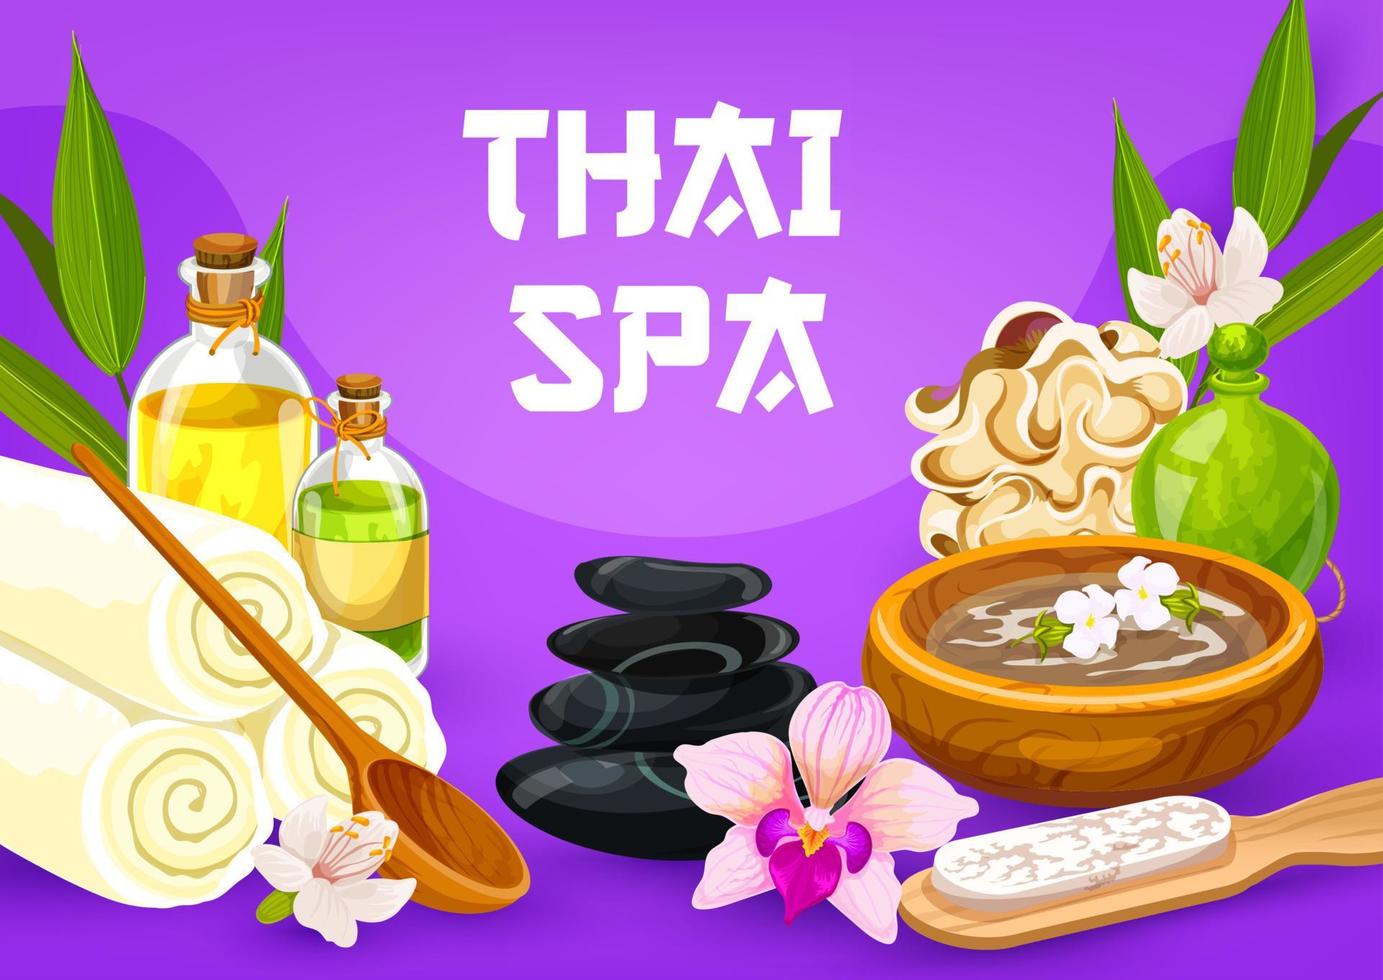 Thai massage spa oil and stones, towels and sponge vector